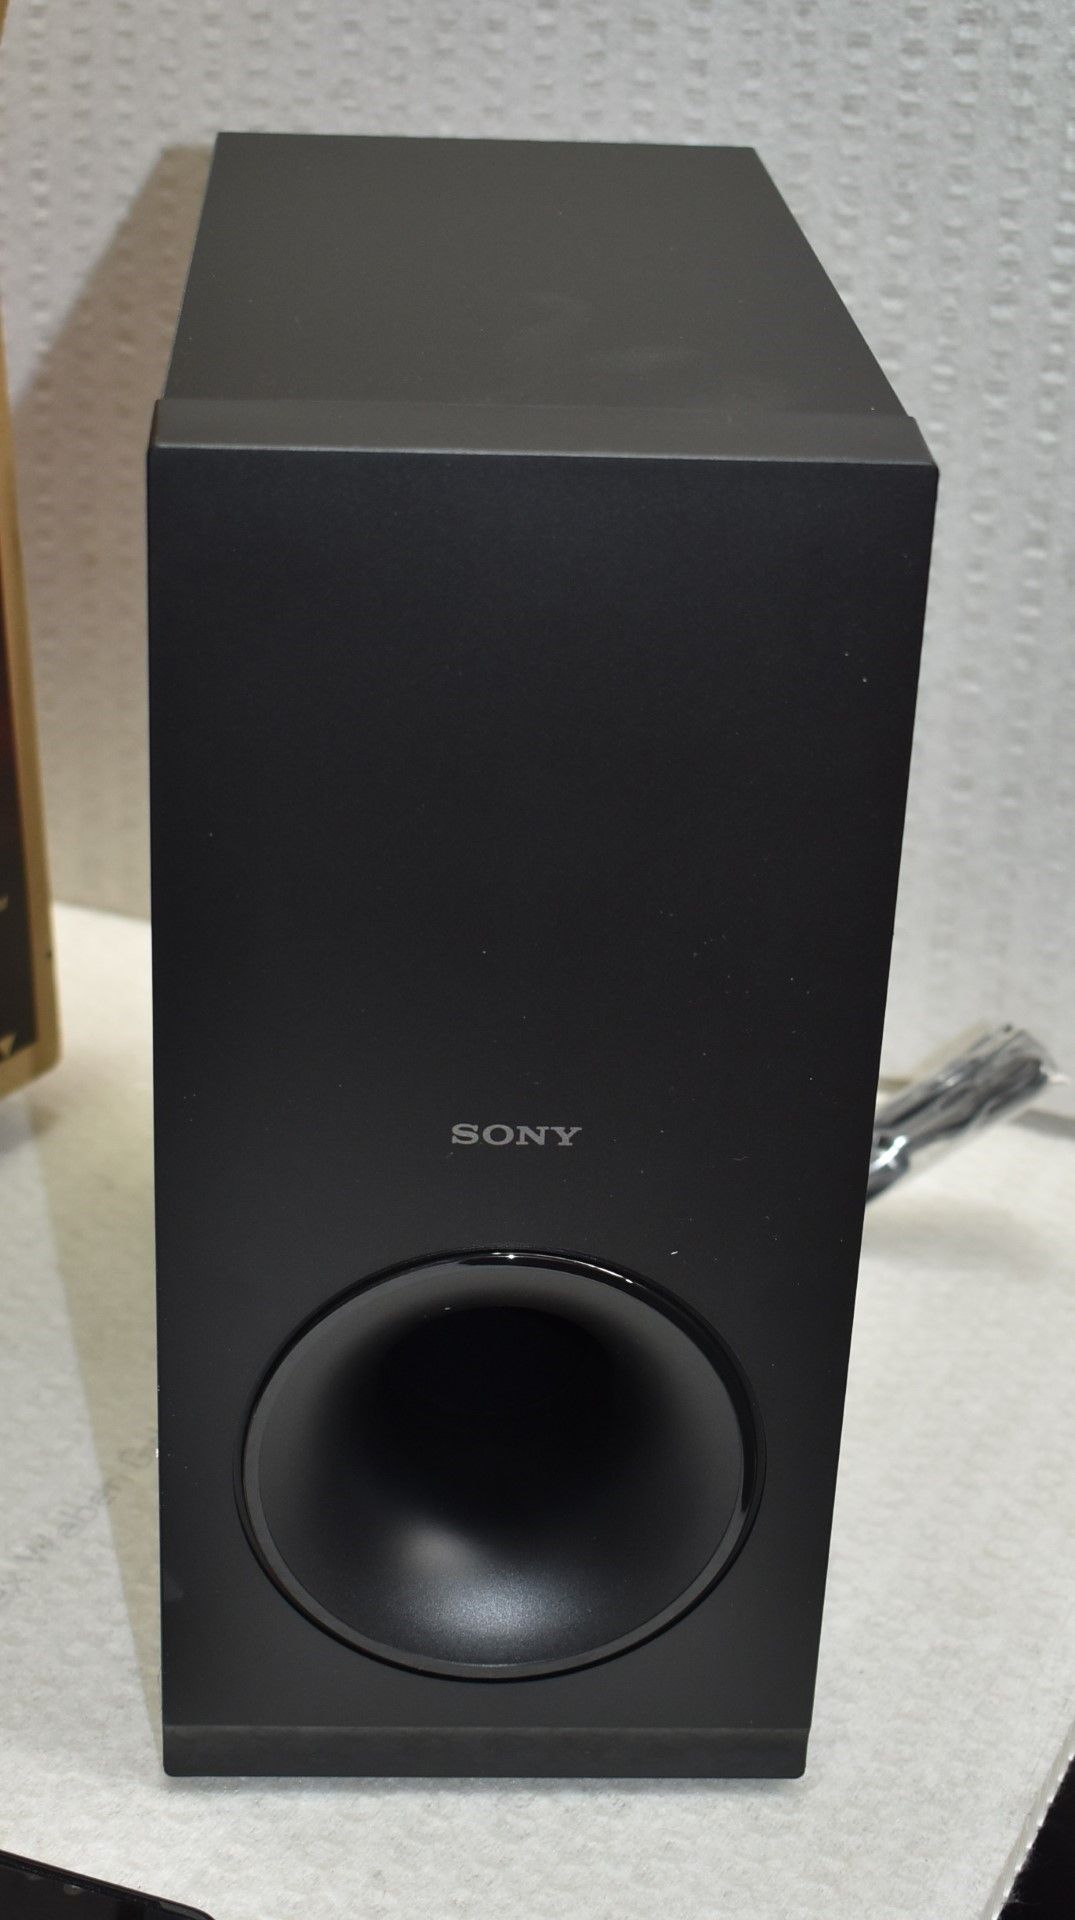 1 x Sony Surround Sound Home Theater Speaker Set - Includes Four Speakers and Subwoofer - New & - Image 5 of 7